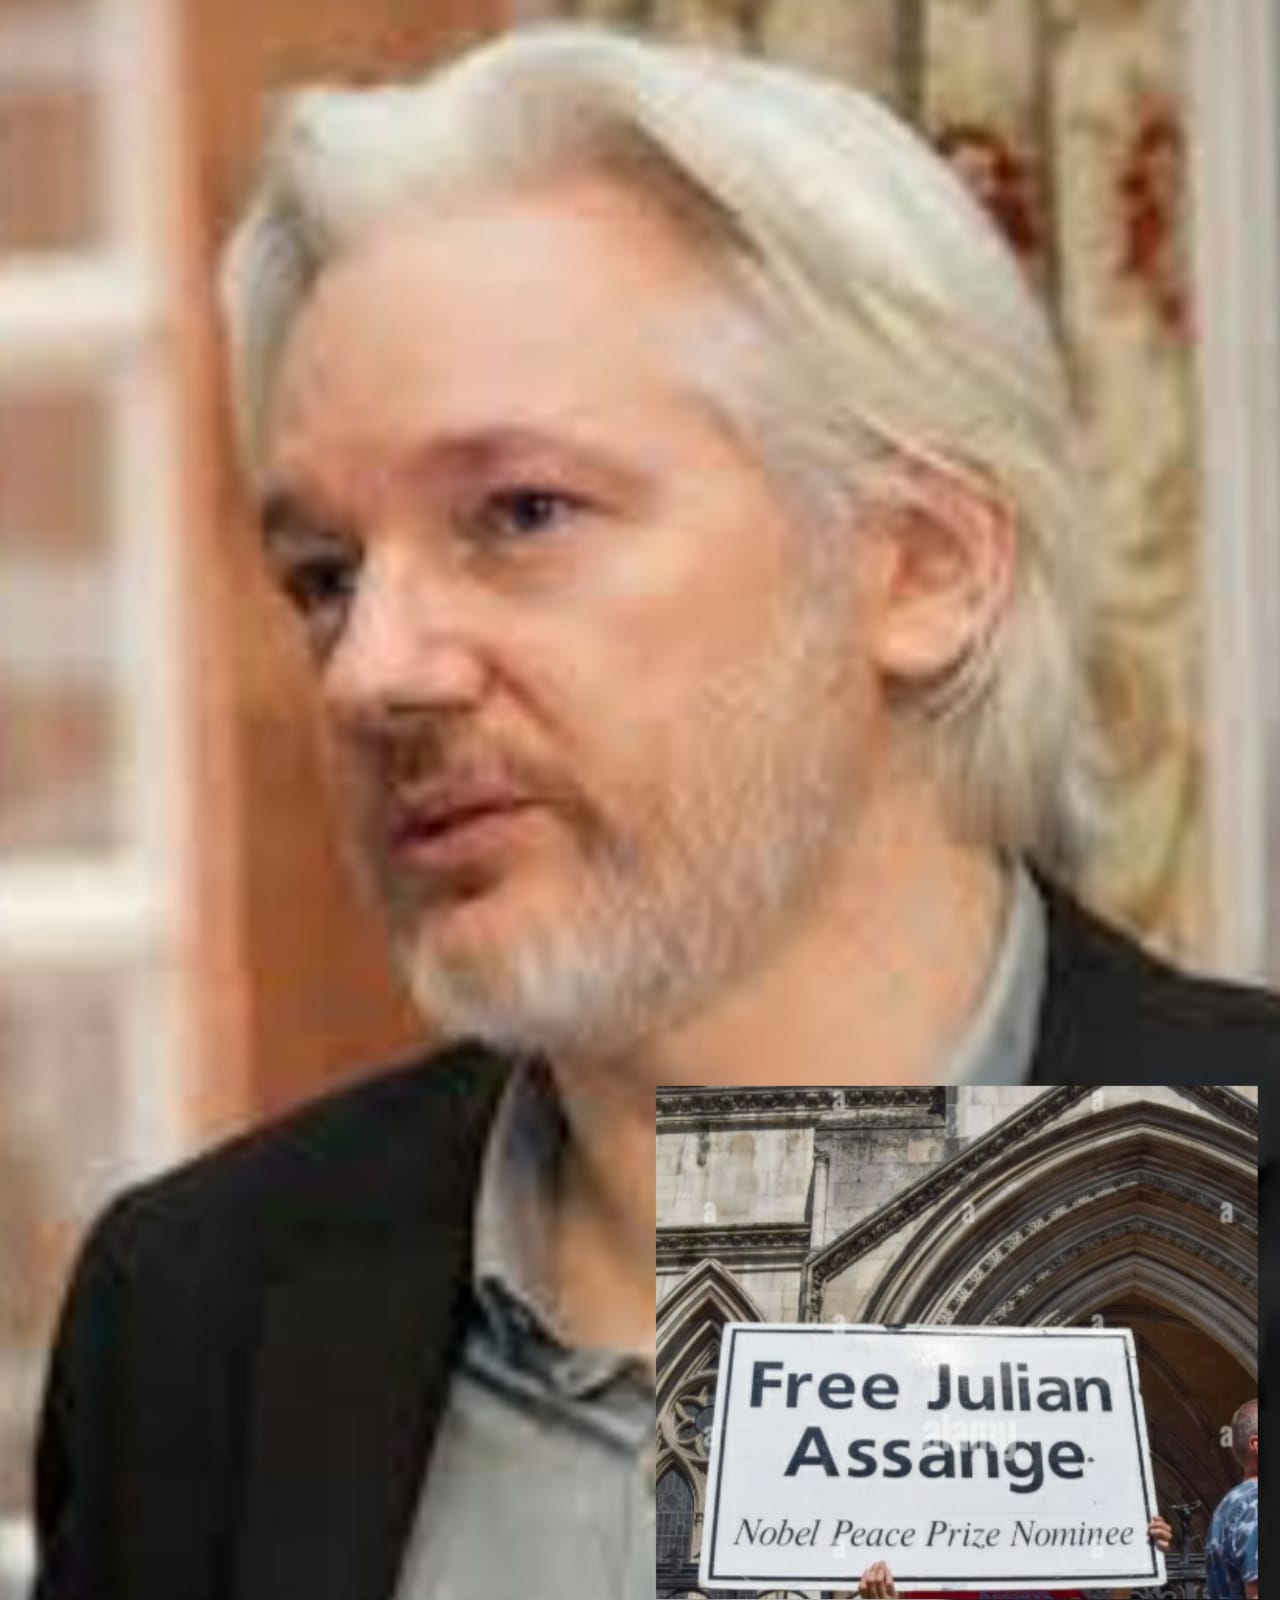 US appeals Against decision by UK Judge not to extradite Assange to US